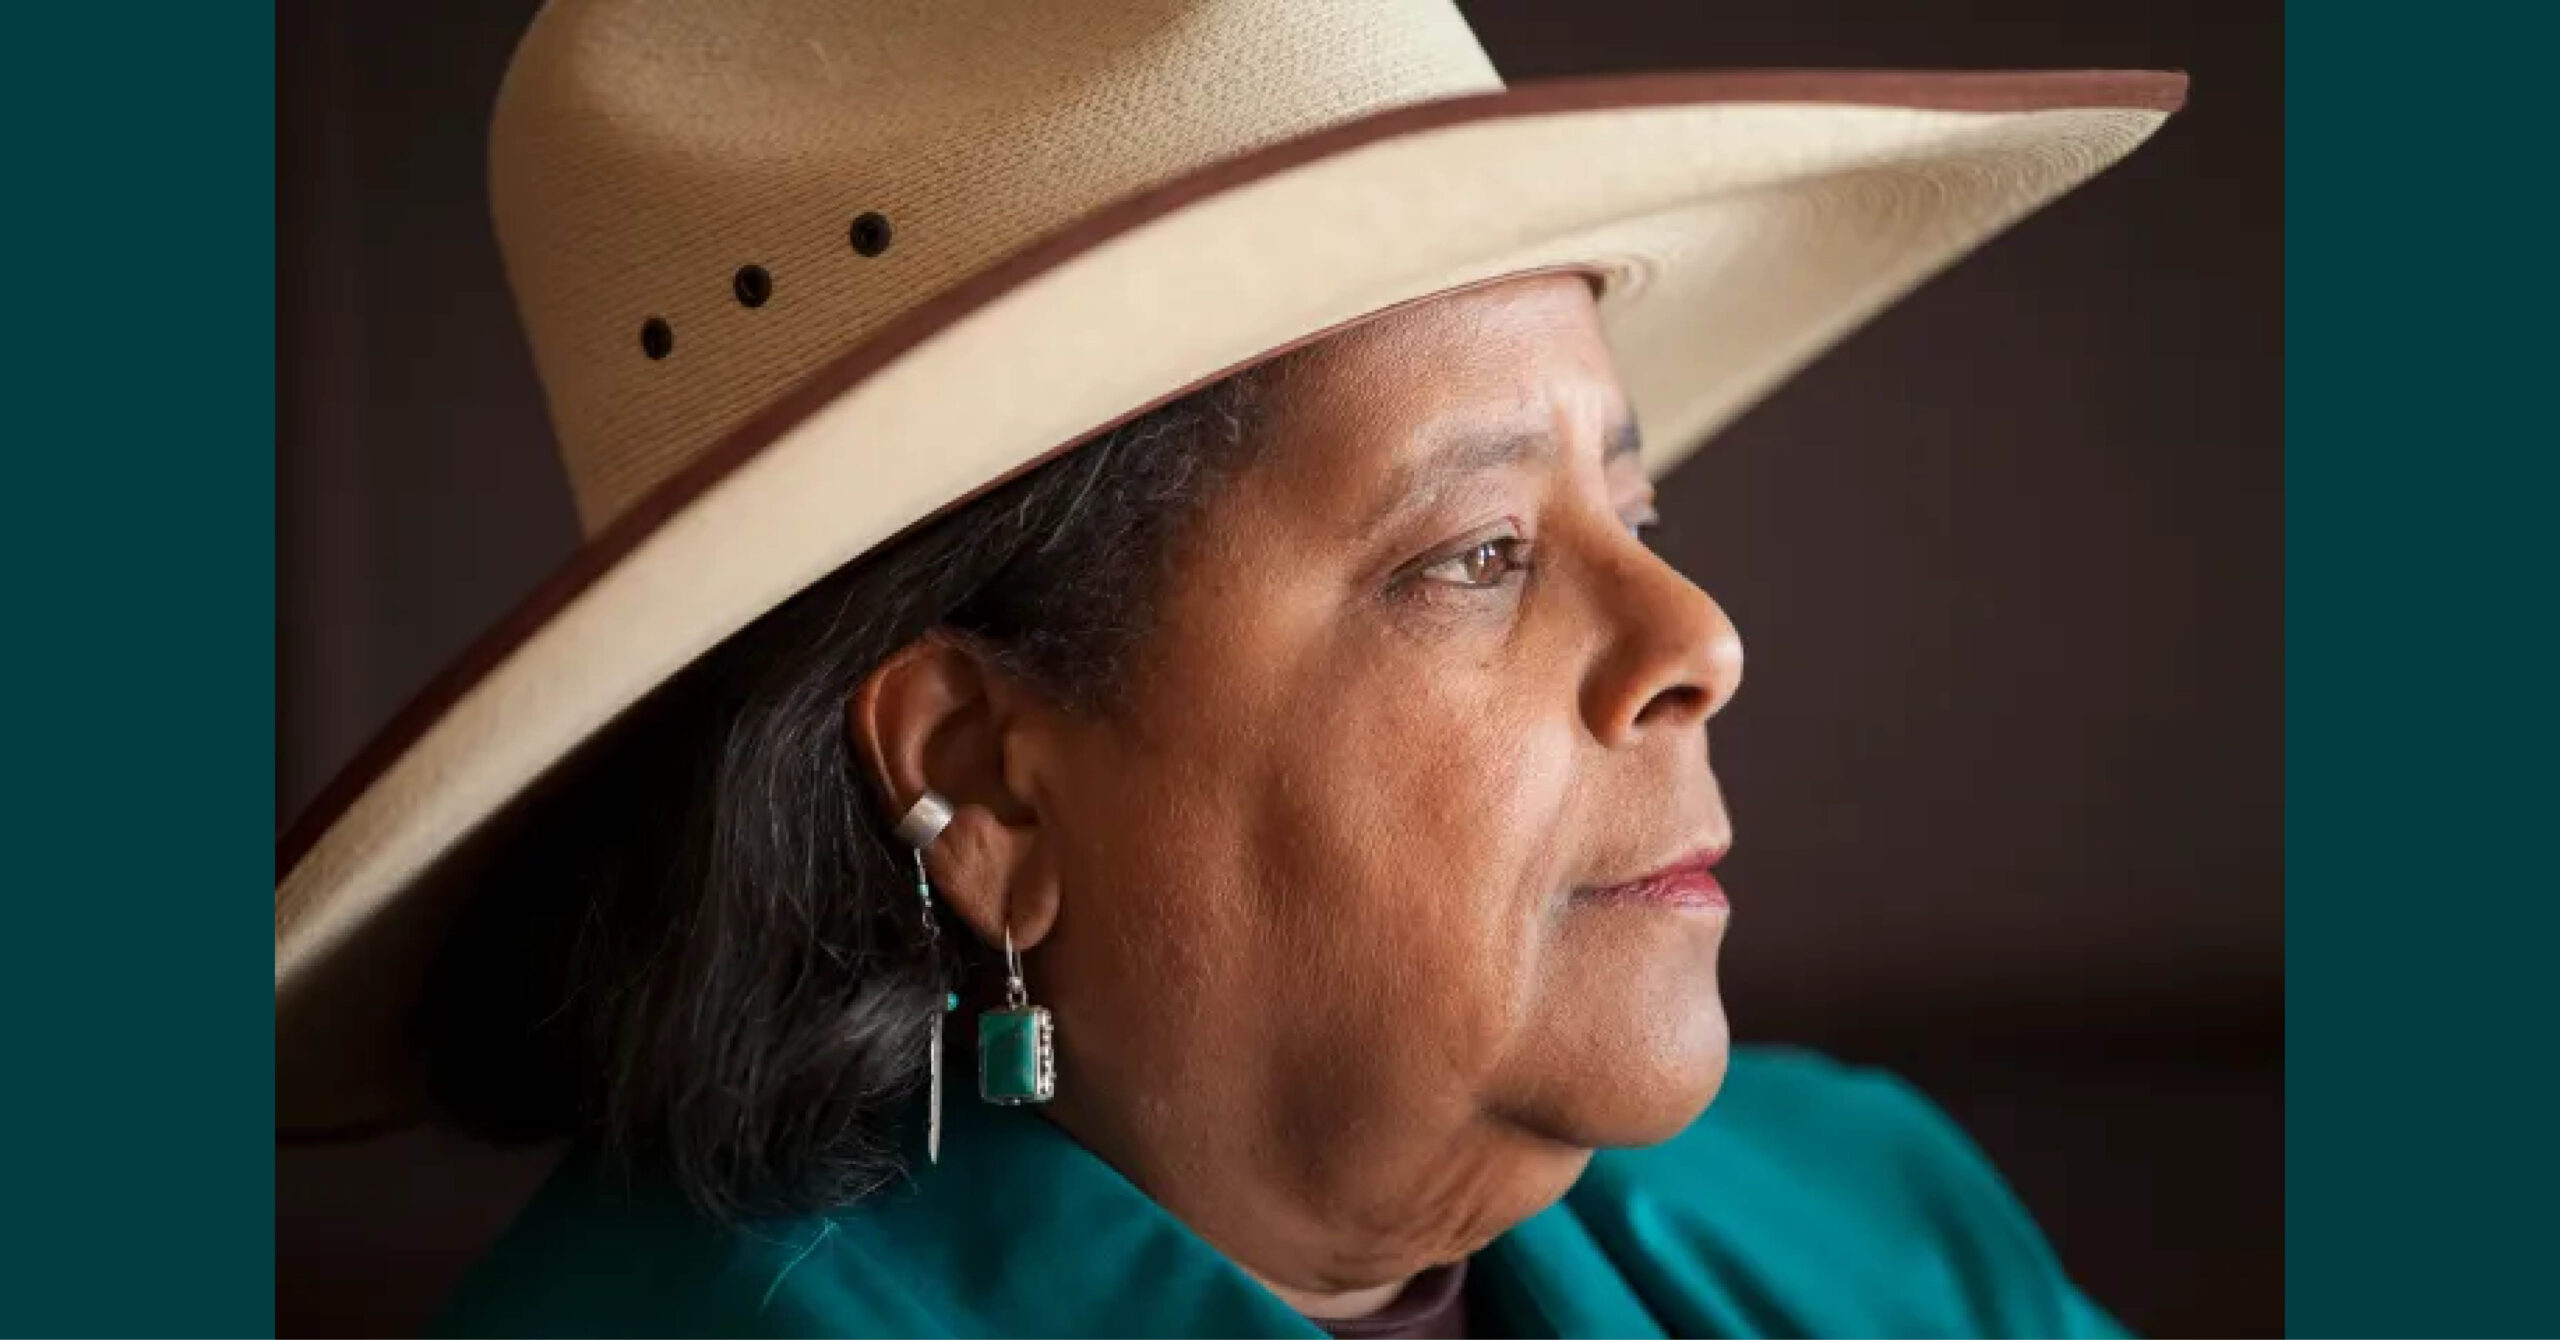 Portrait of Angela Bates. Bates is a Black woman wearing a broad-brimmed hat, a turquoise jacket, and dangling metallic earrings.